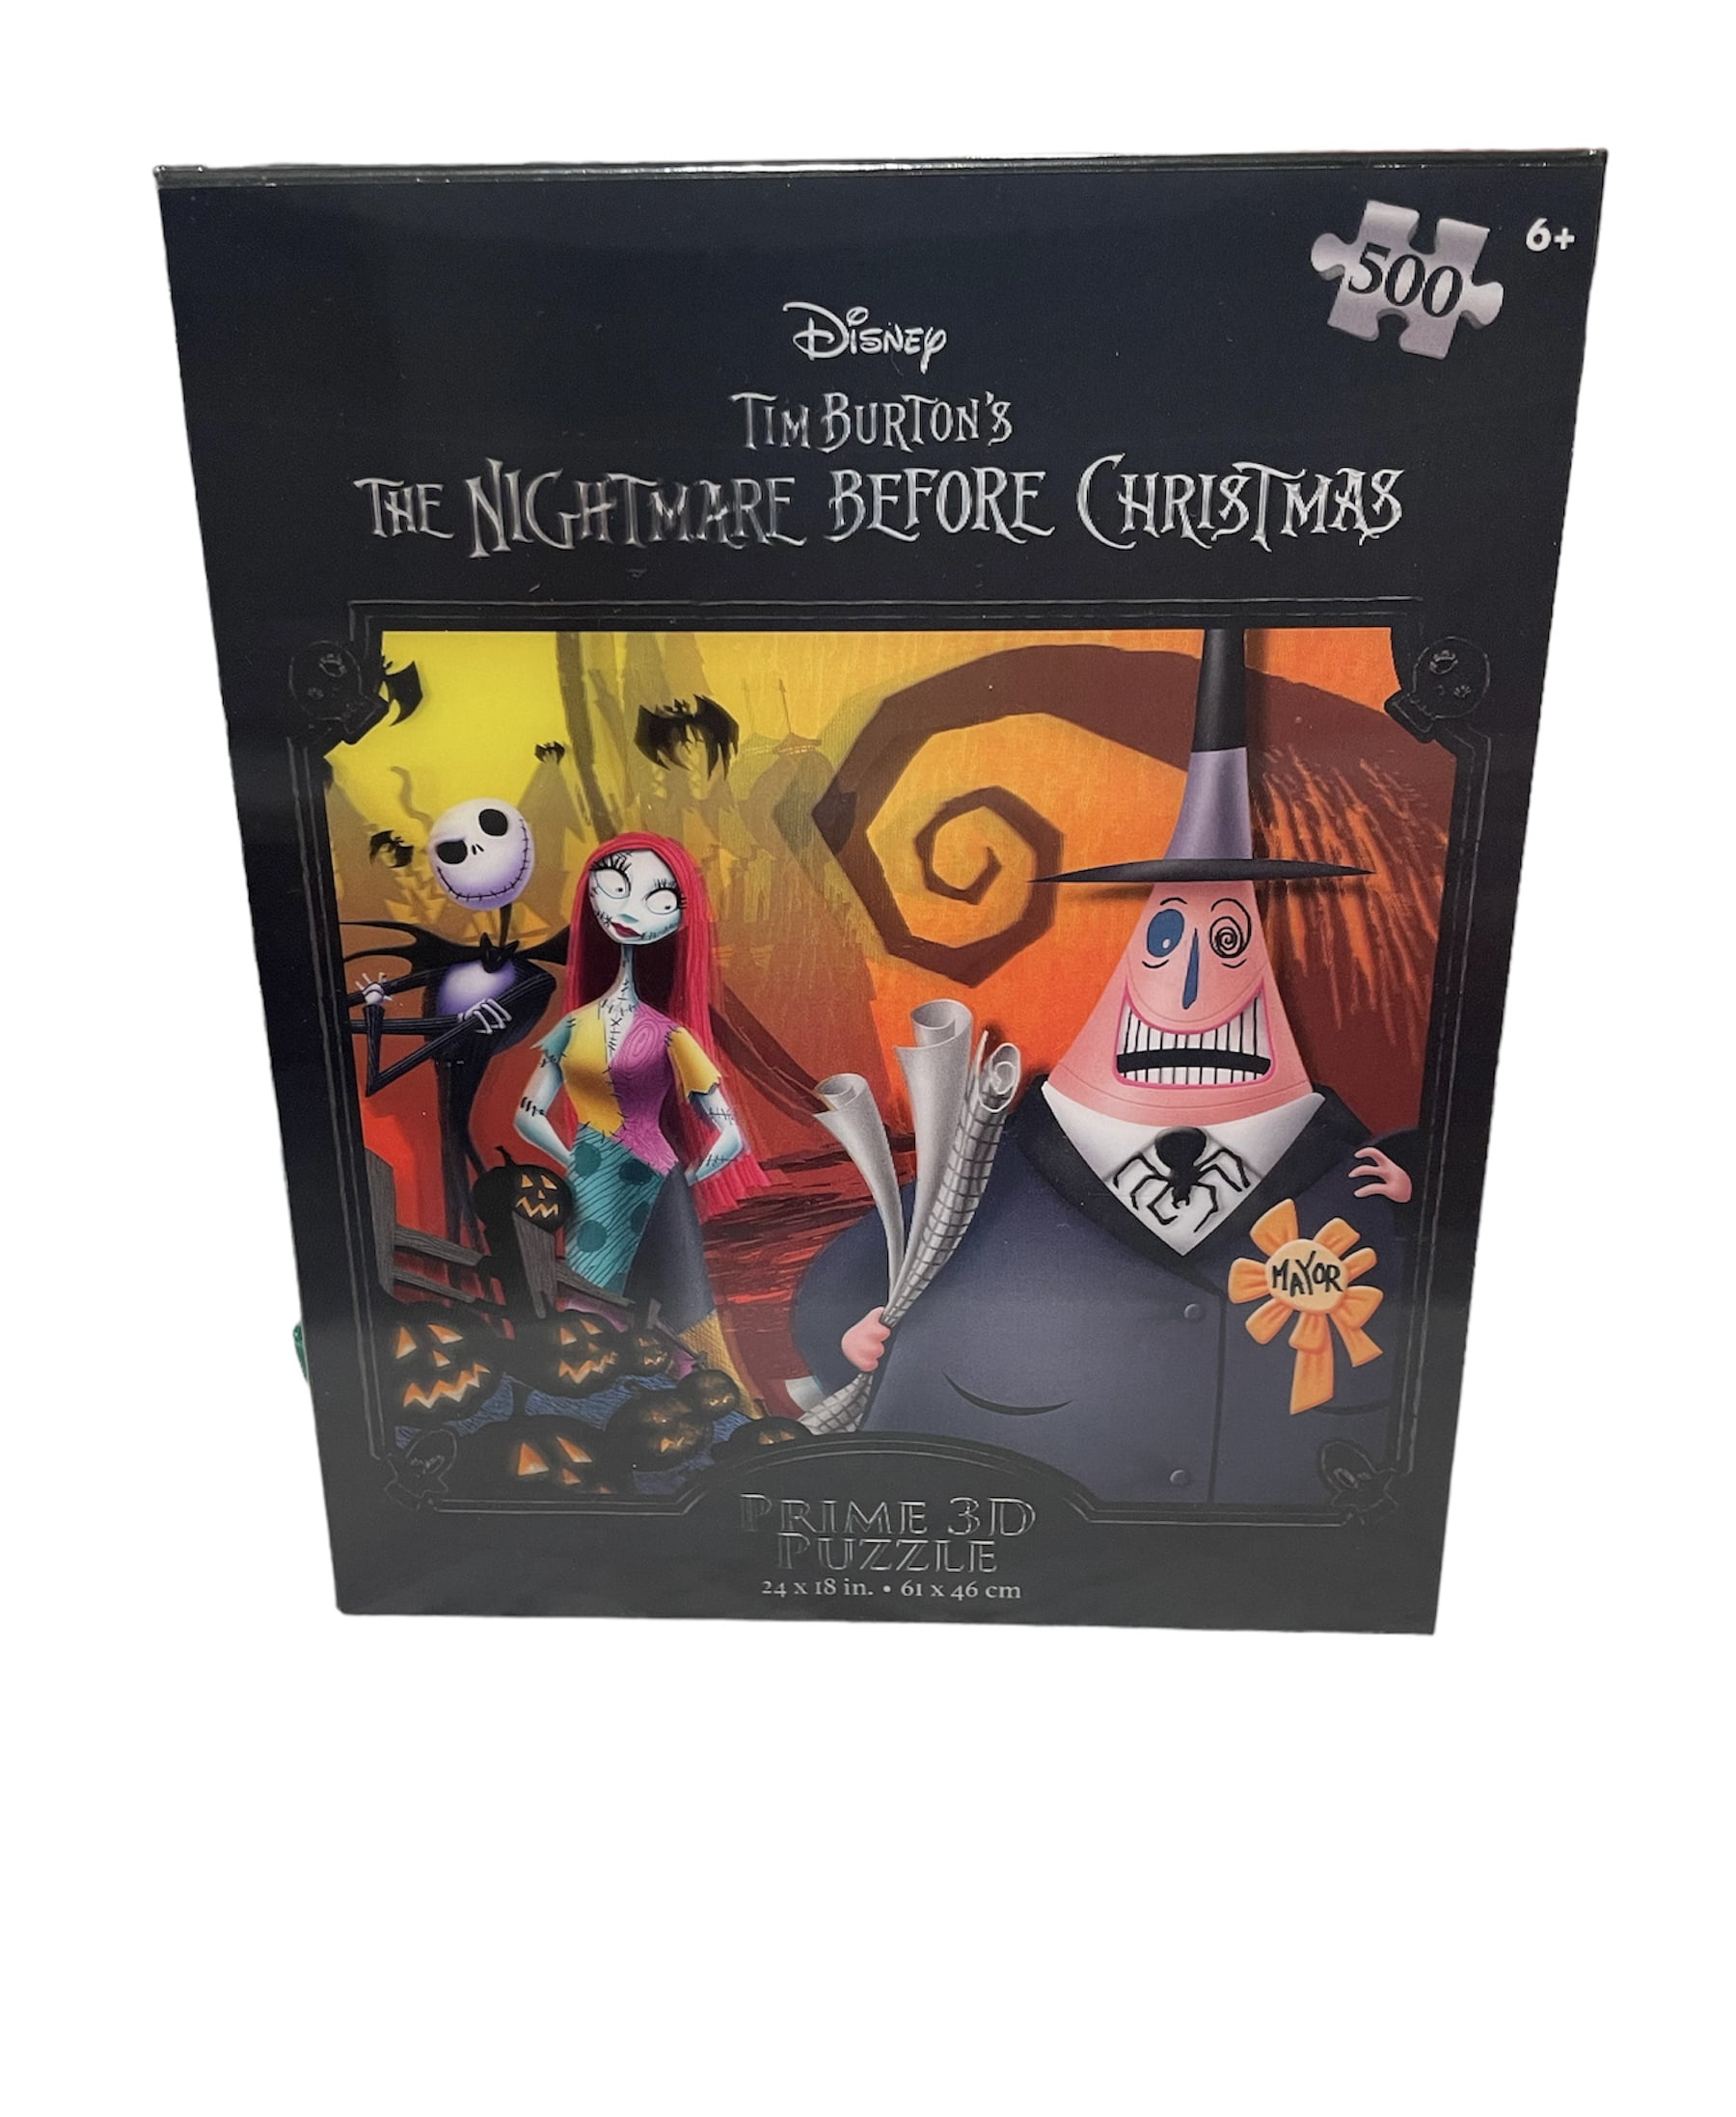 Prime 3d Disney Nightmare Before Christmas Puzzle 300 Pieces Blue